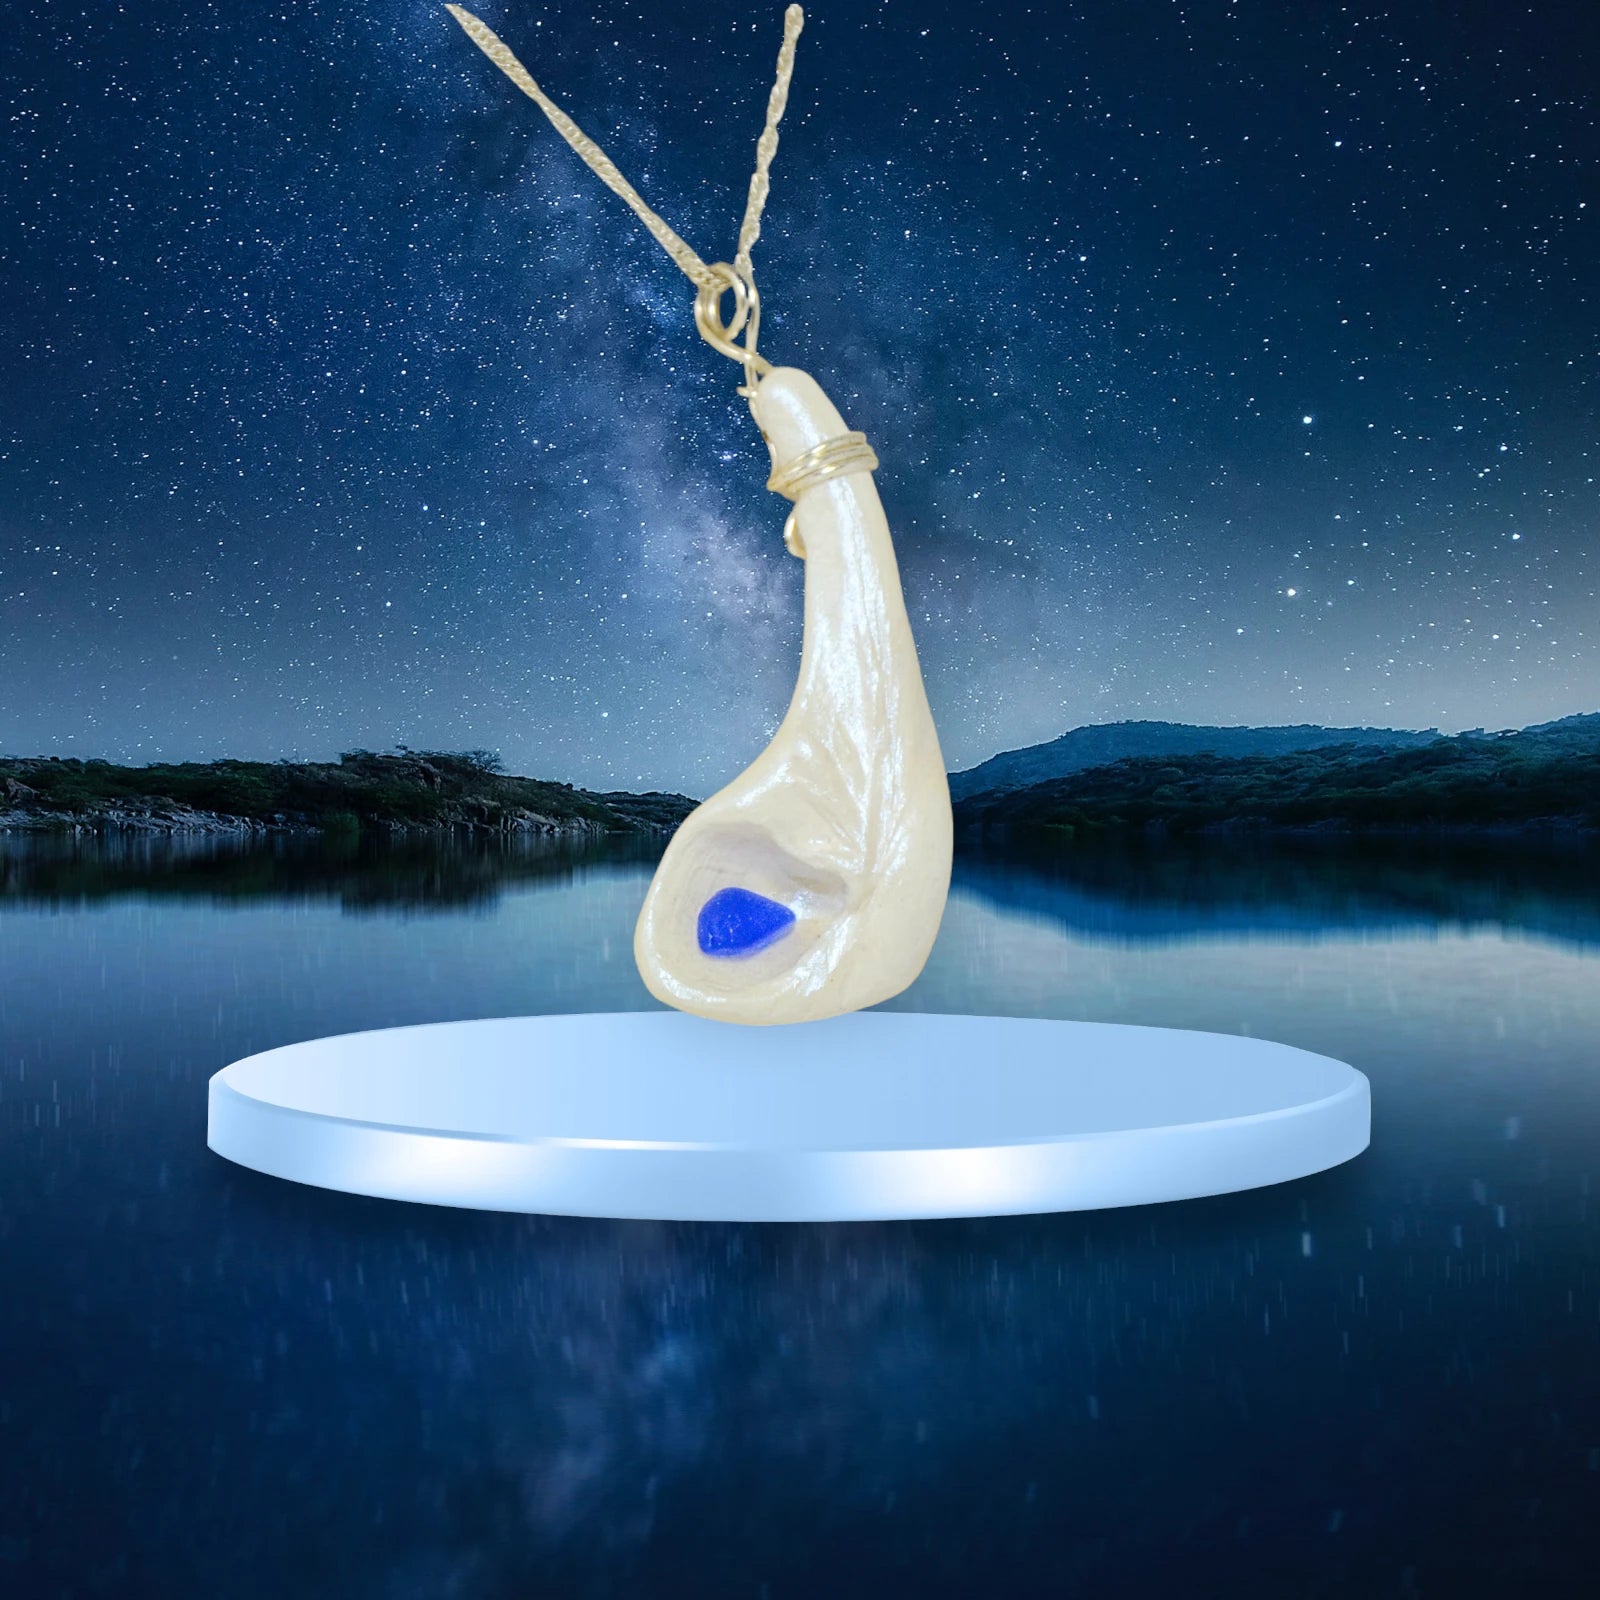 The cobalt pendant with beautiful blue seaglass is shown hanging from a chain with a silvery blue platfrom over a lake with a night sky.  The milky way sits behind the pendant.